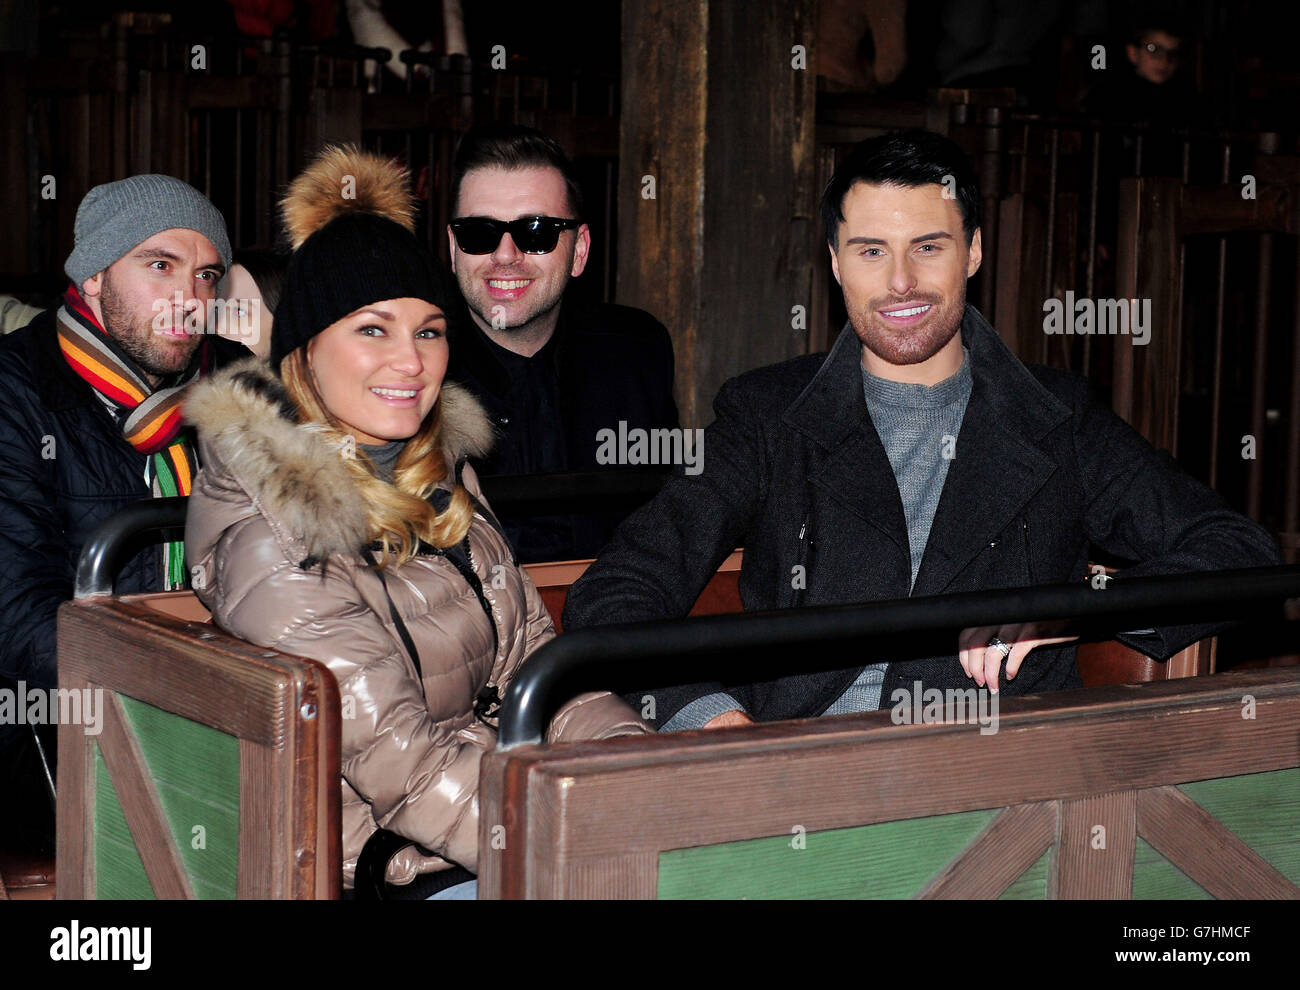 Sam Faiers, Mark Feehily (second right) and Rylan Clarke (right), riding Thunder Mountain, during the charity trip to Disneyland Paris for under privileged children. PRESS ASSOCIATION Photo. Picture date: Tuesday December 16, 2014. Photo credit should read: Nick Ansell/PA Wire Stock Photo